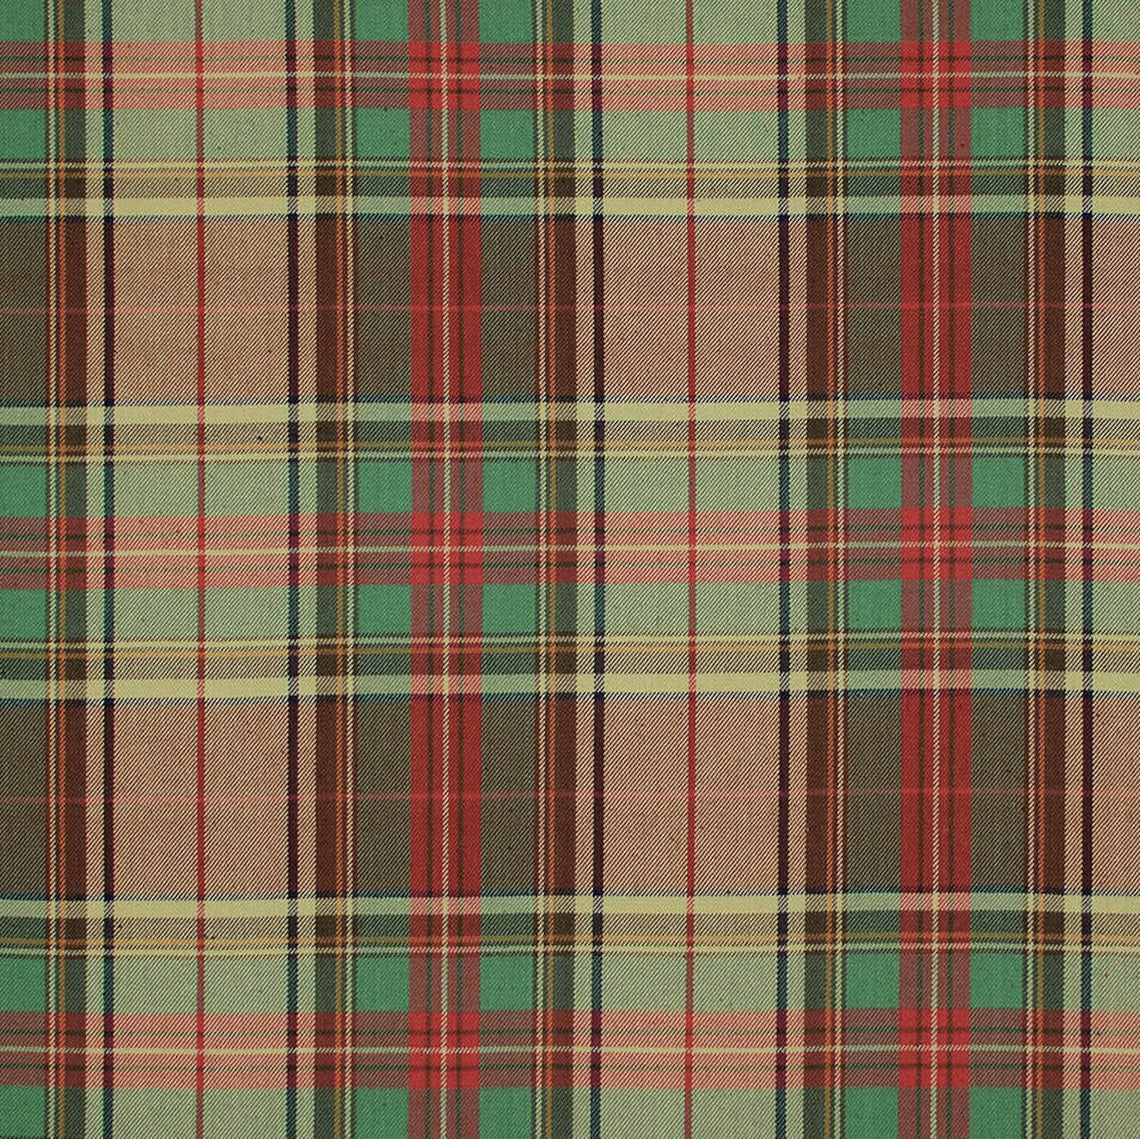 tailored valance in ancient campbell ivy league tartan plaid